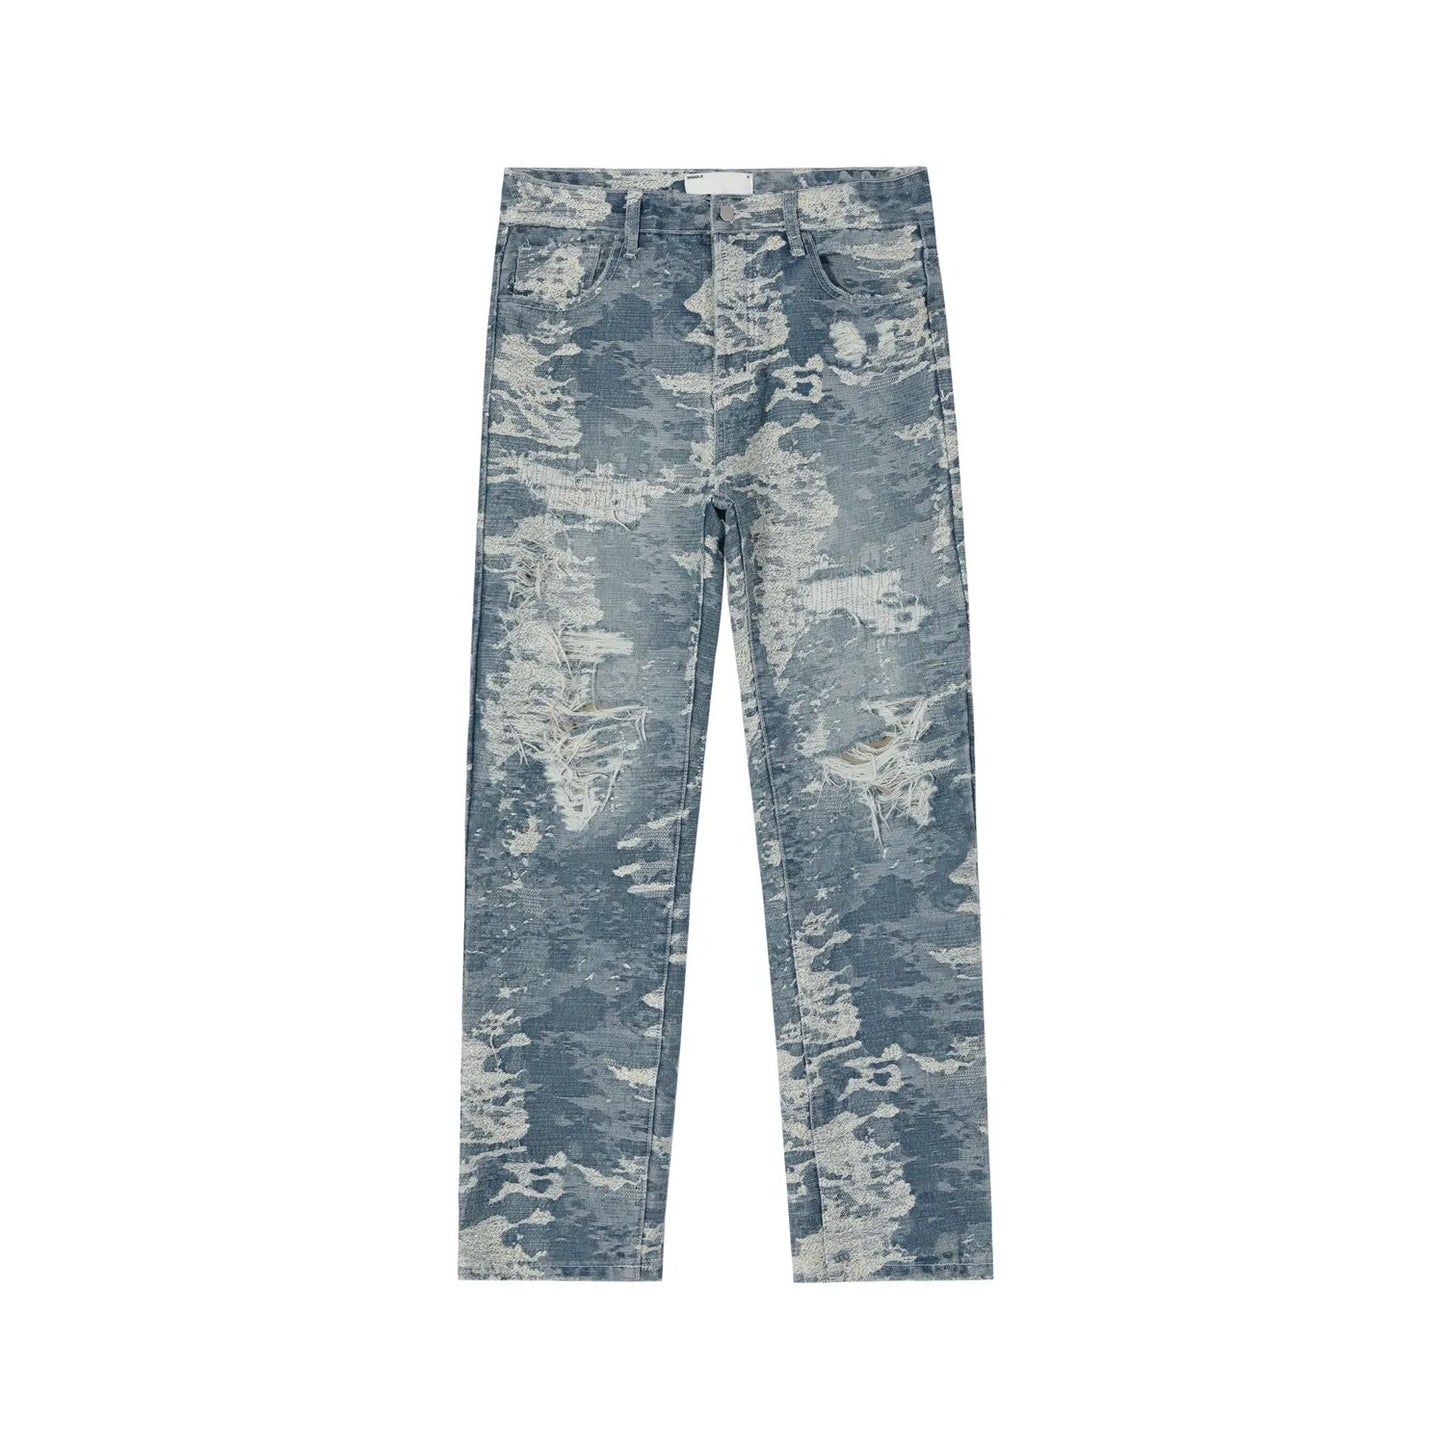 High street washed distressed R69 y2k jeans